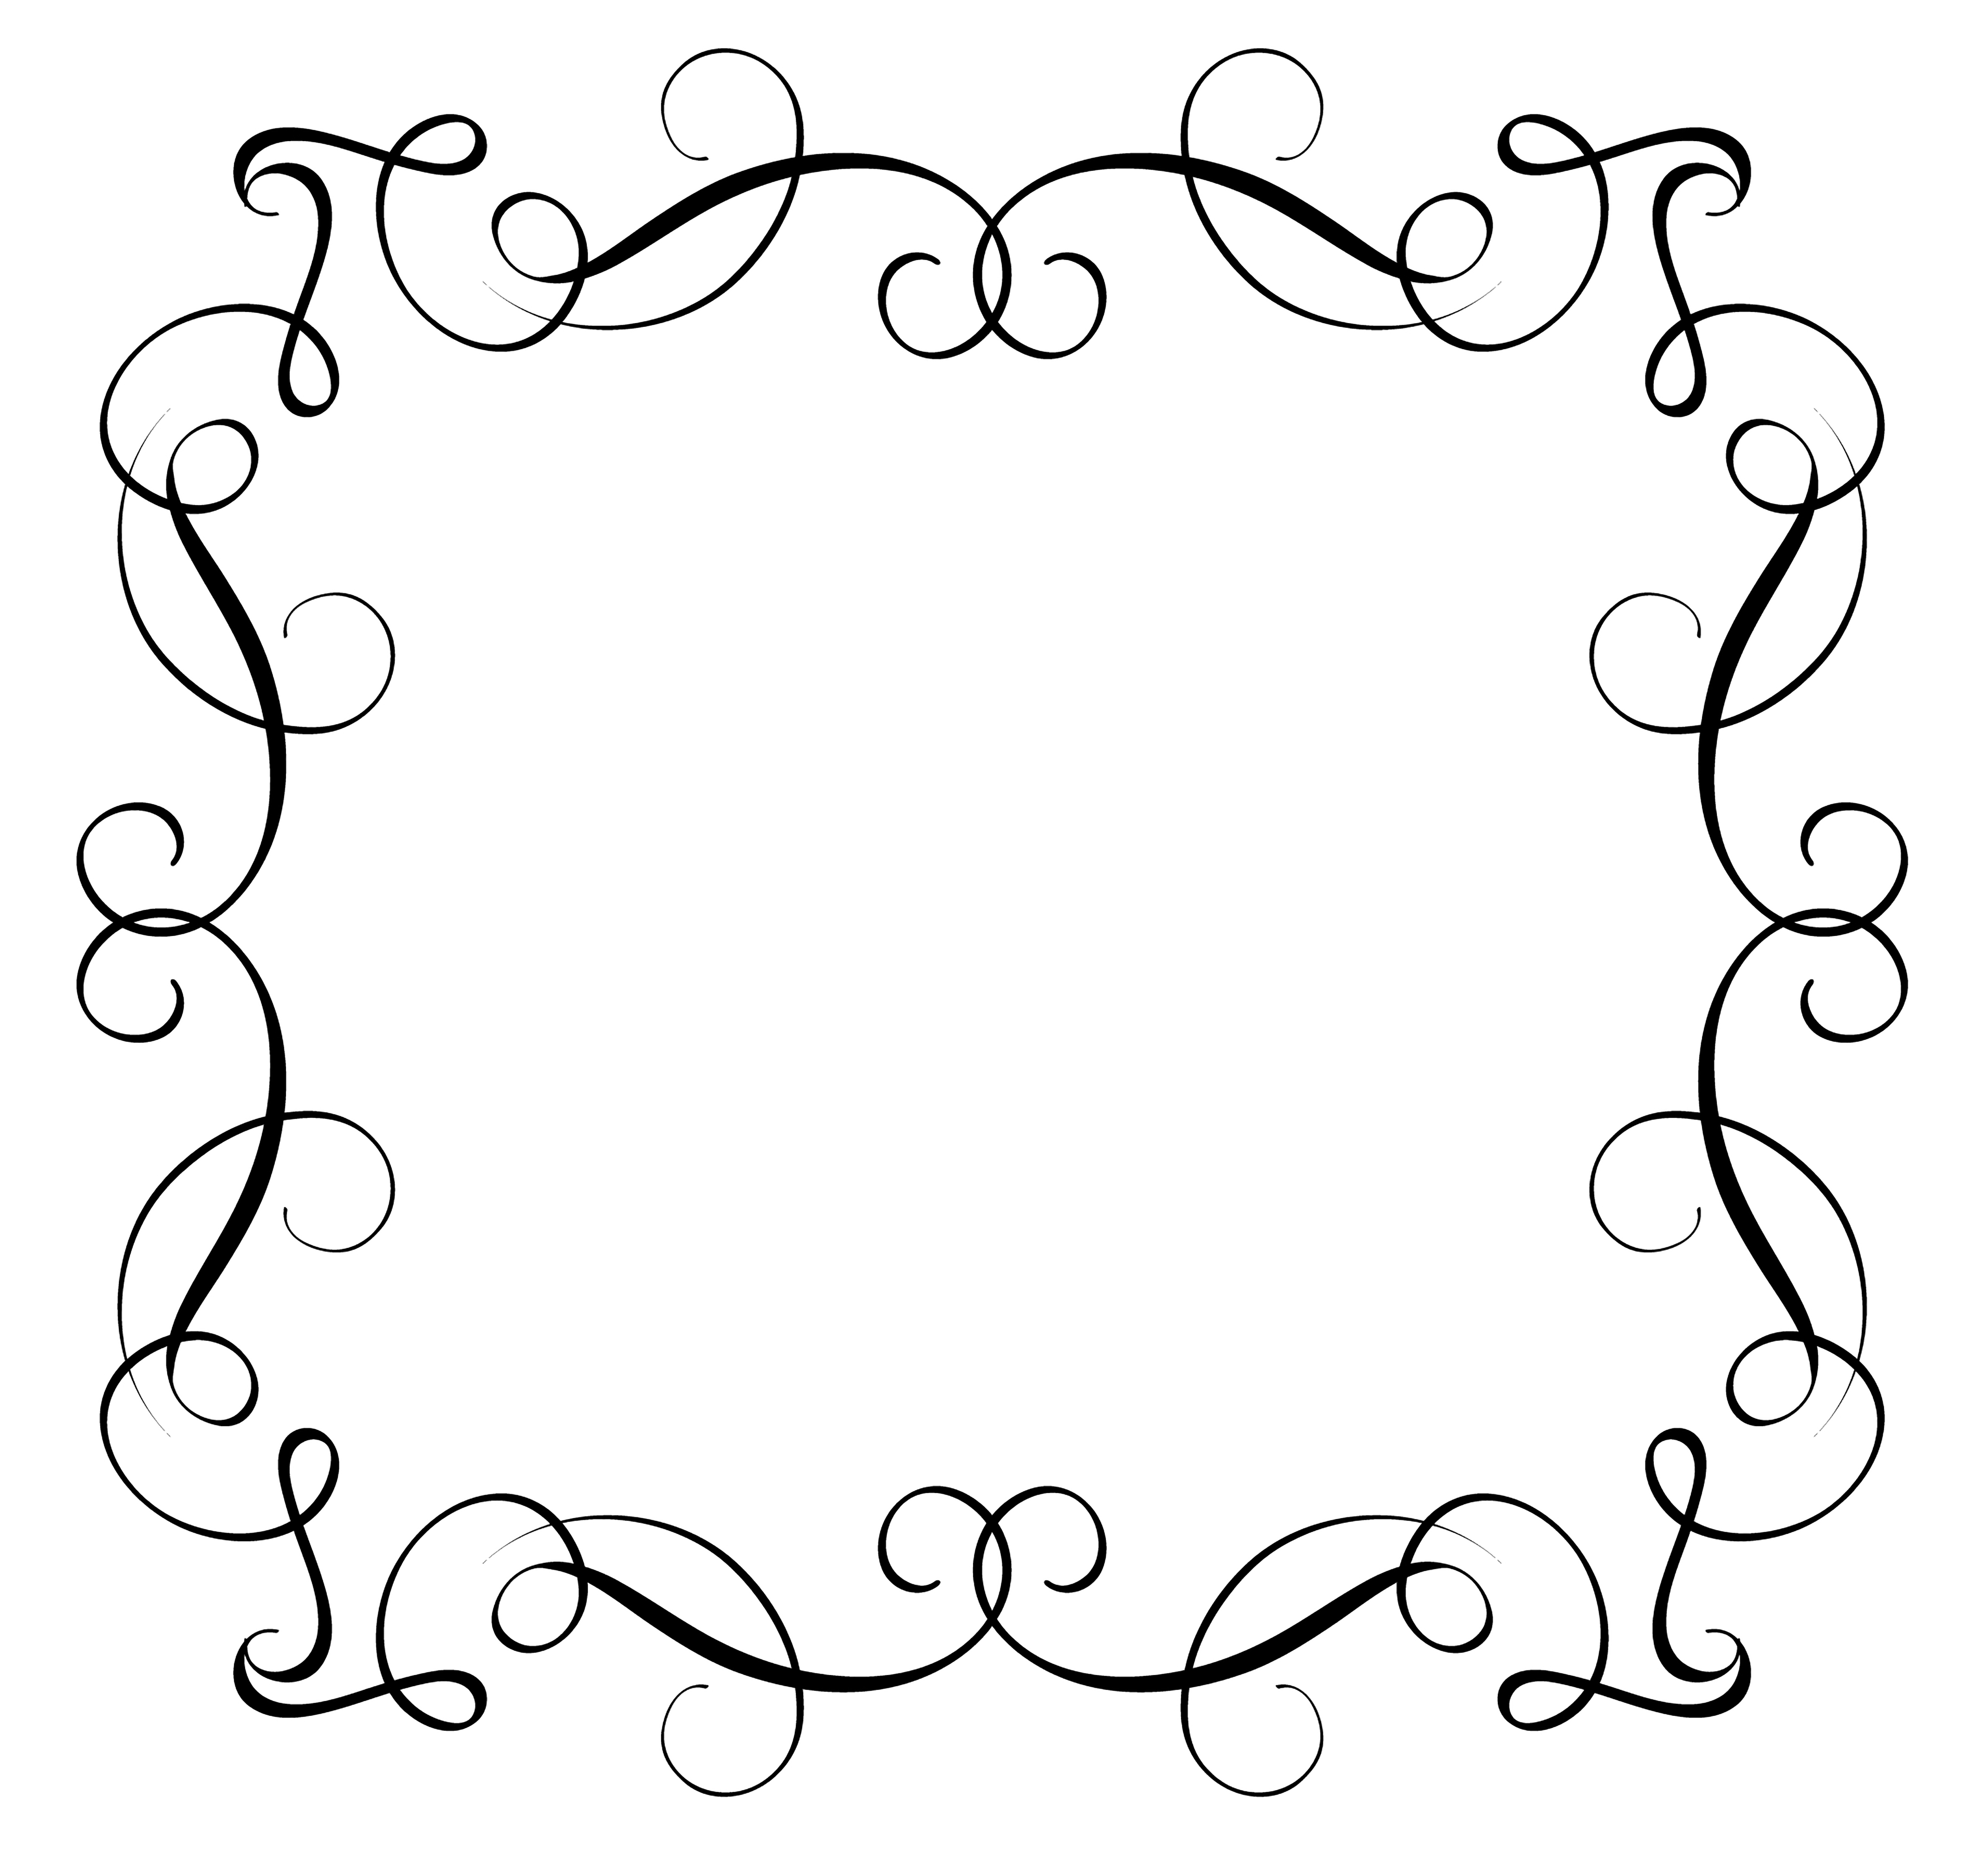  Decorative  Frame  and Borders Art Calligraphy lettering 